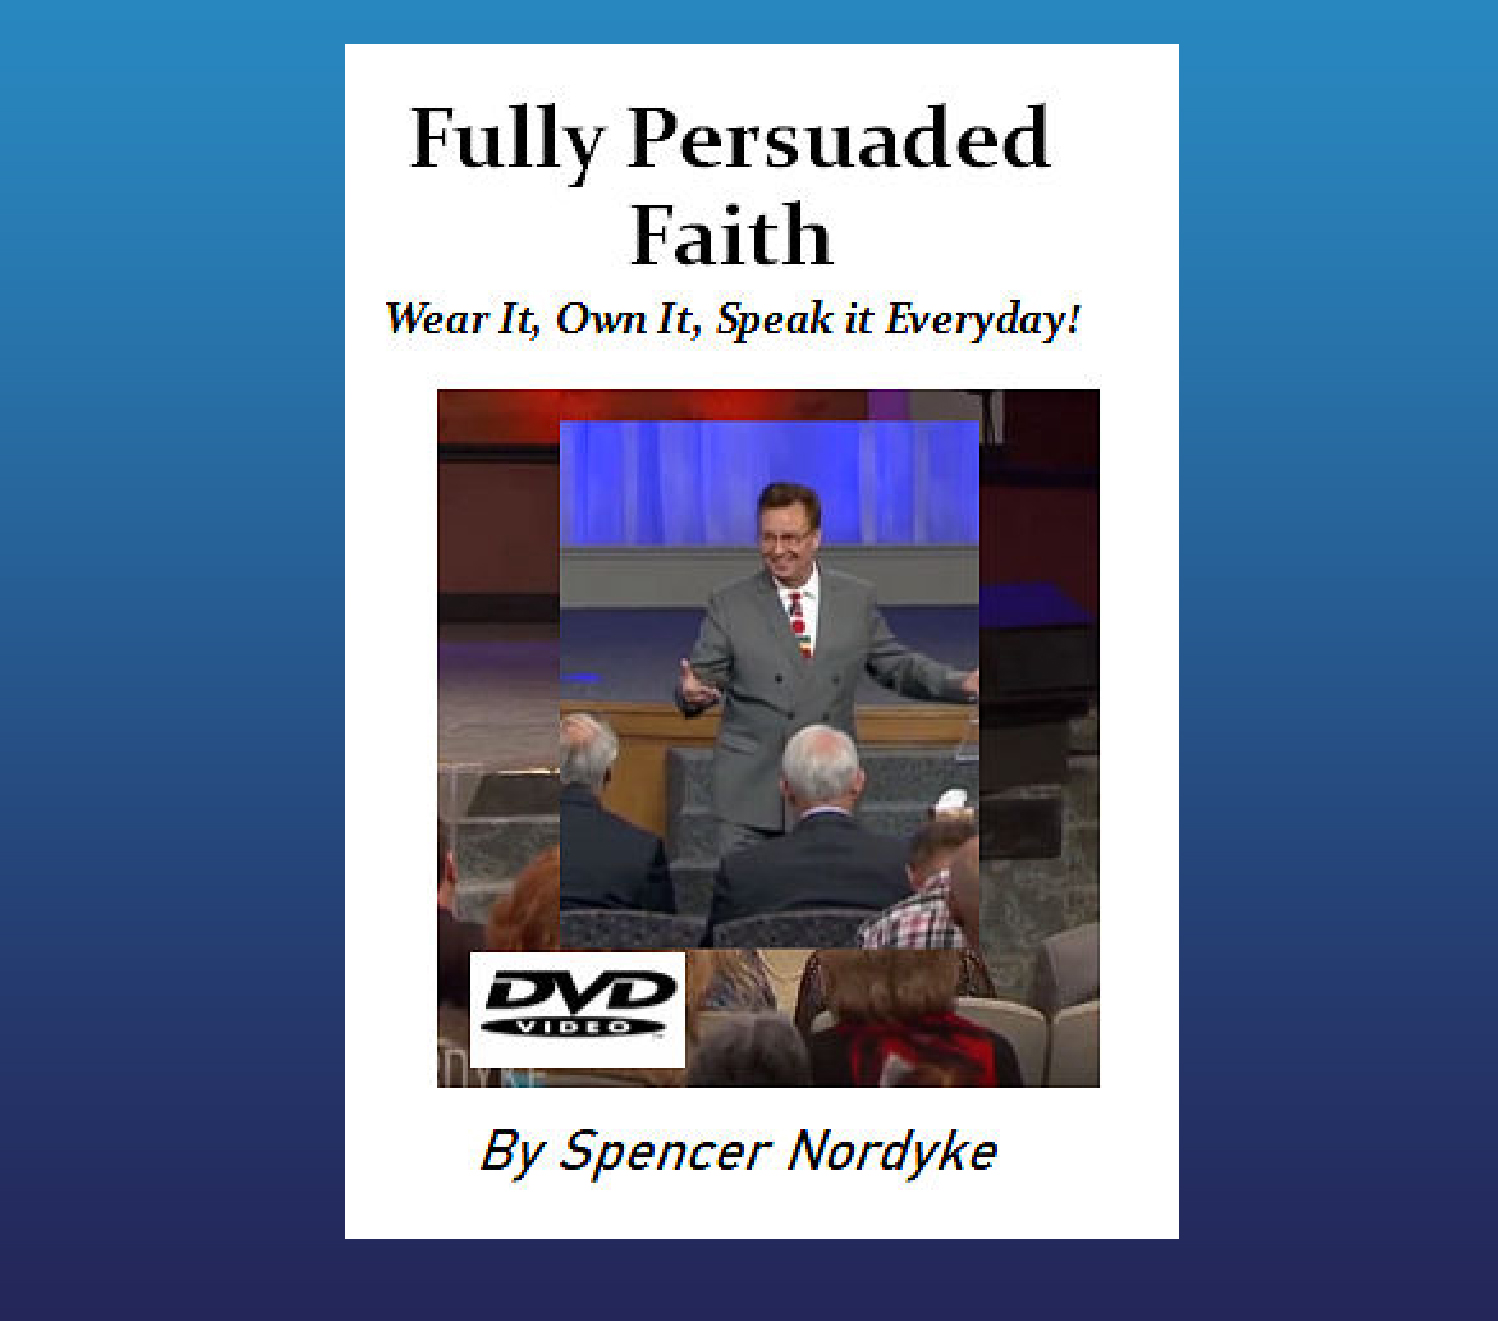 Fully Persuaded Faith DVD
By Spencer Nordyke